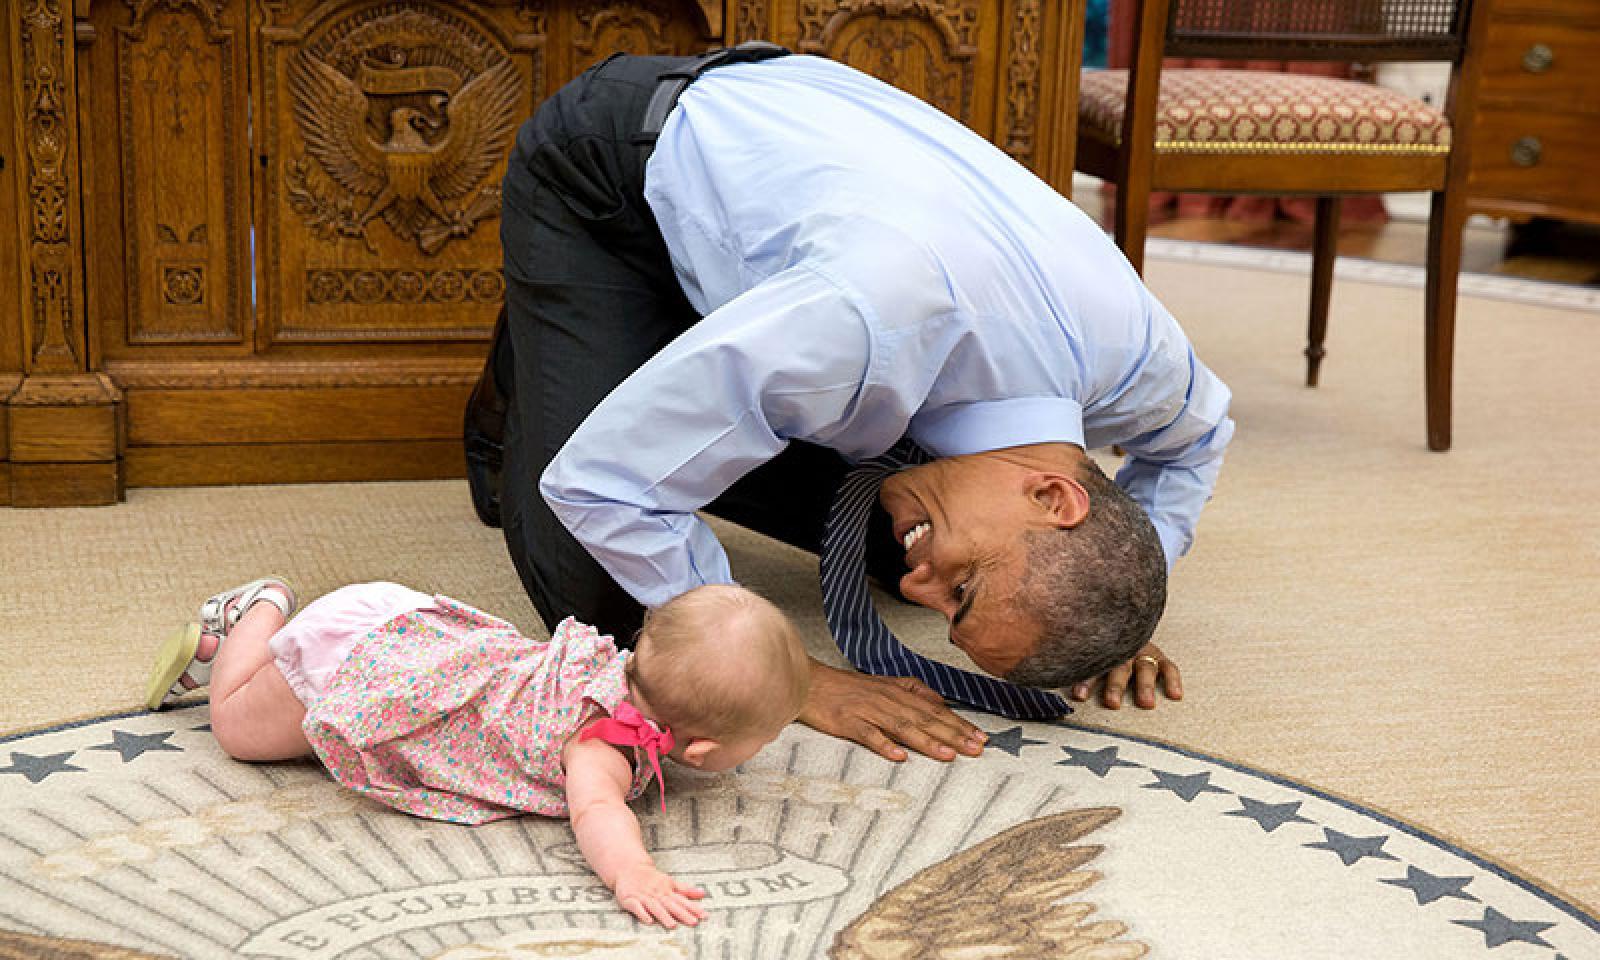 Obama with baby